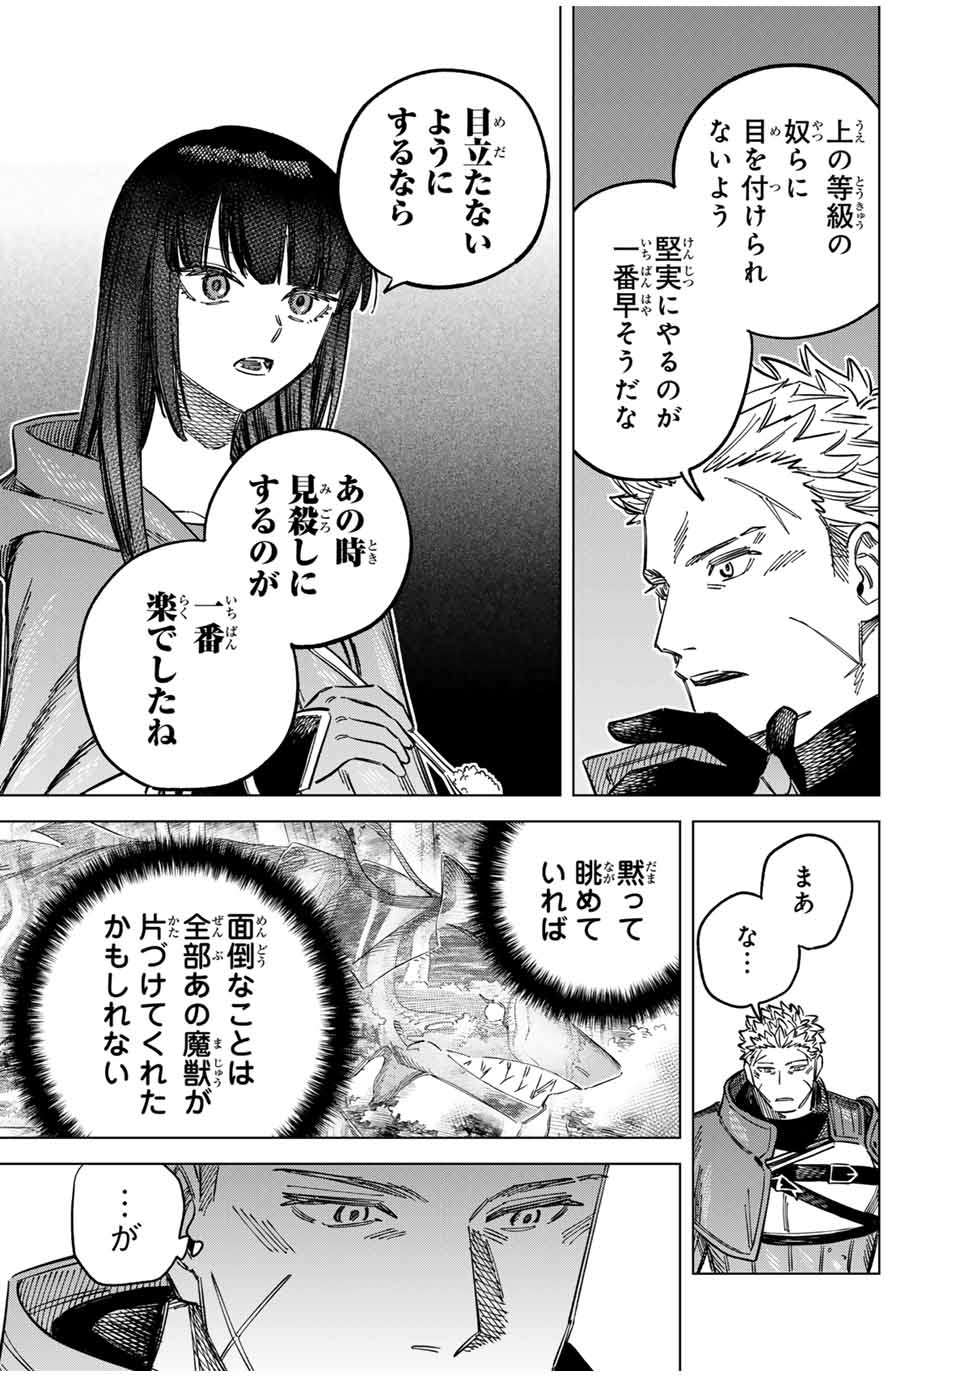 Witch and Mercenary 魔女と傭兵 第6話 - Page 13